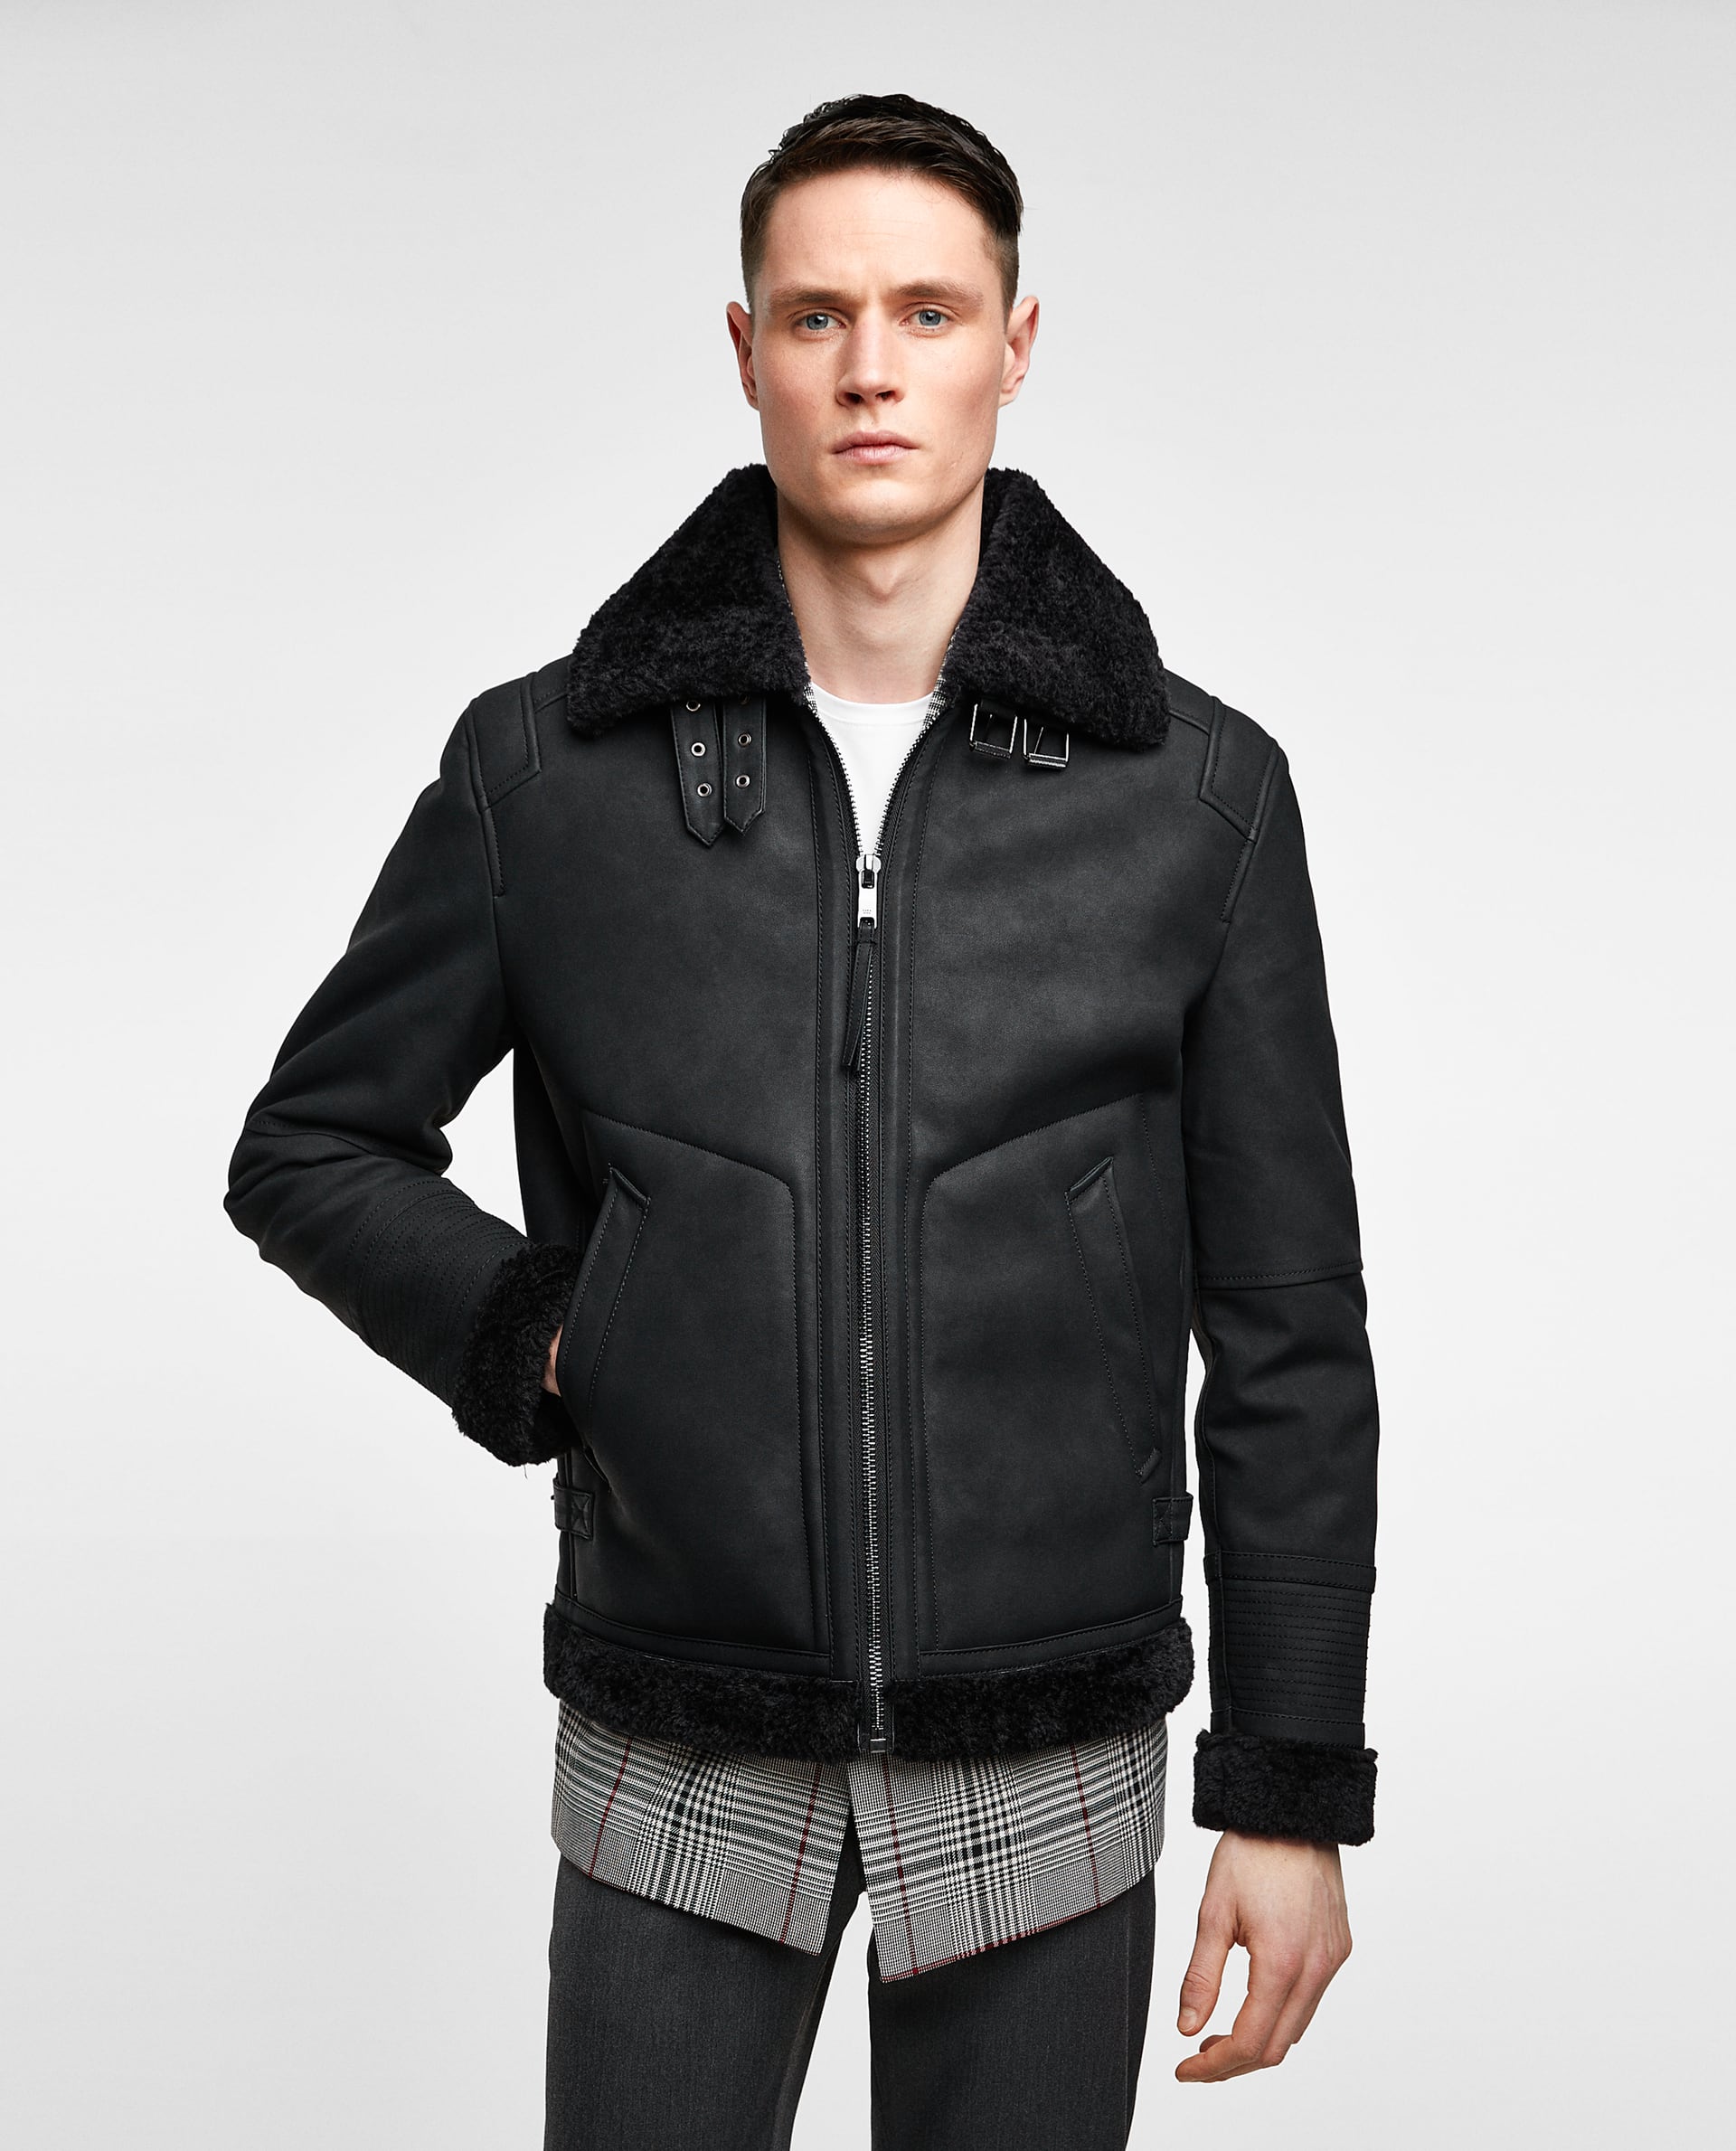 http://flawlesscrowns.com/wp-content/uploads/2018/01/ZARA-Man-Double-Faced-Faux-Shearling-Jacket-2.jpg